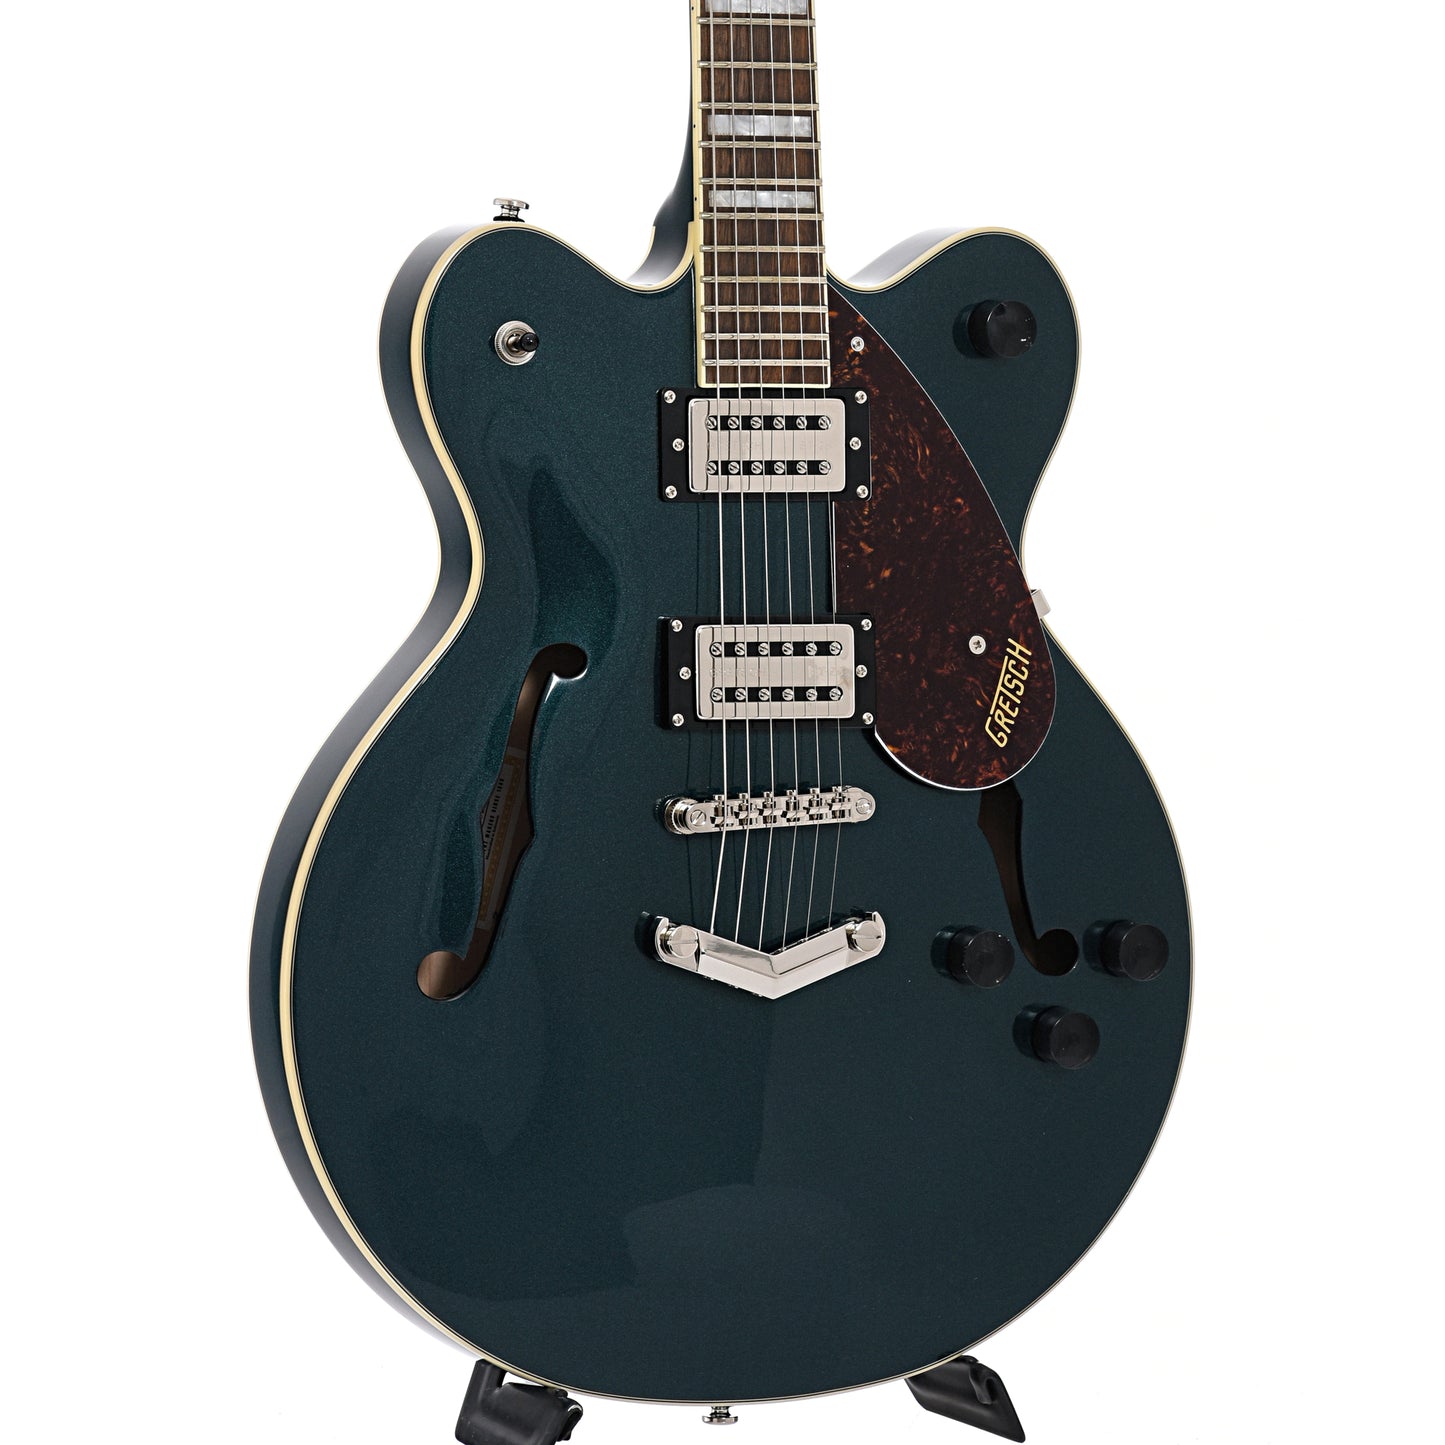 Image 3 of Gretsch G2622 Streamliner Center-Block Double Cutaway Hollow Body Guitar, Midnight Sapphire- SKU# G2622-MDSPH : Product Type Hollow Body Electric Guitars : Elderly Instruments